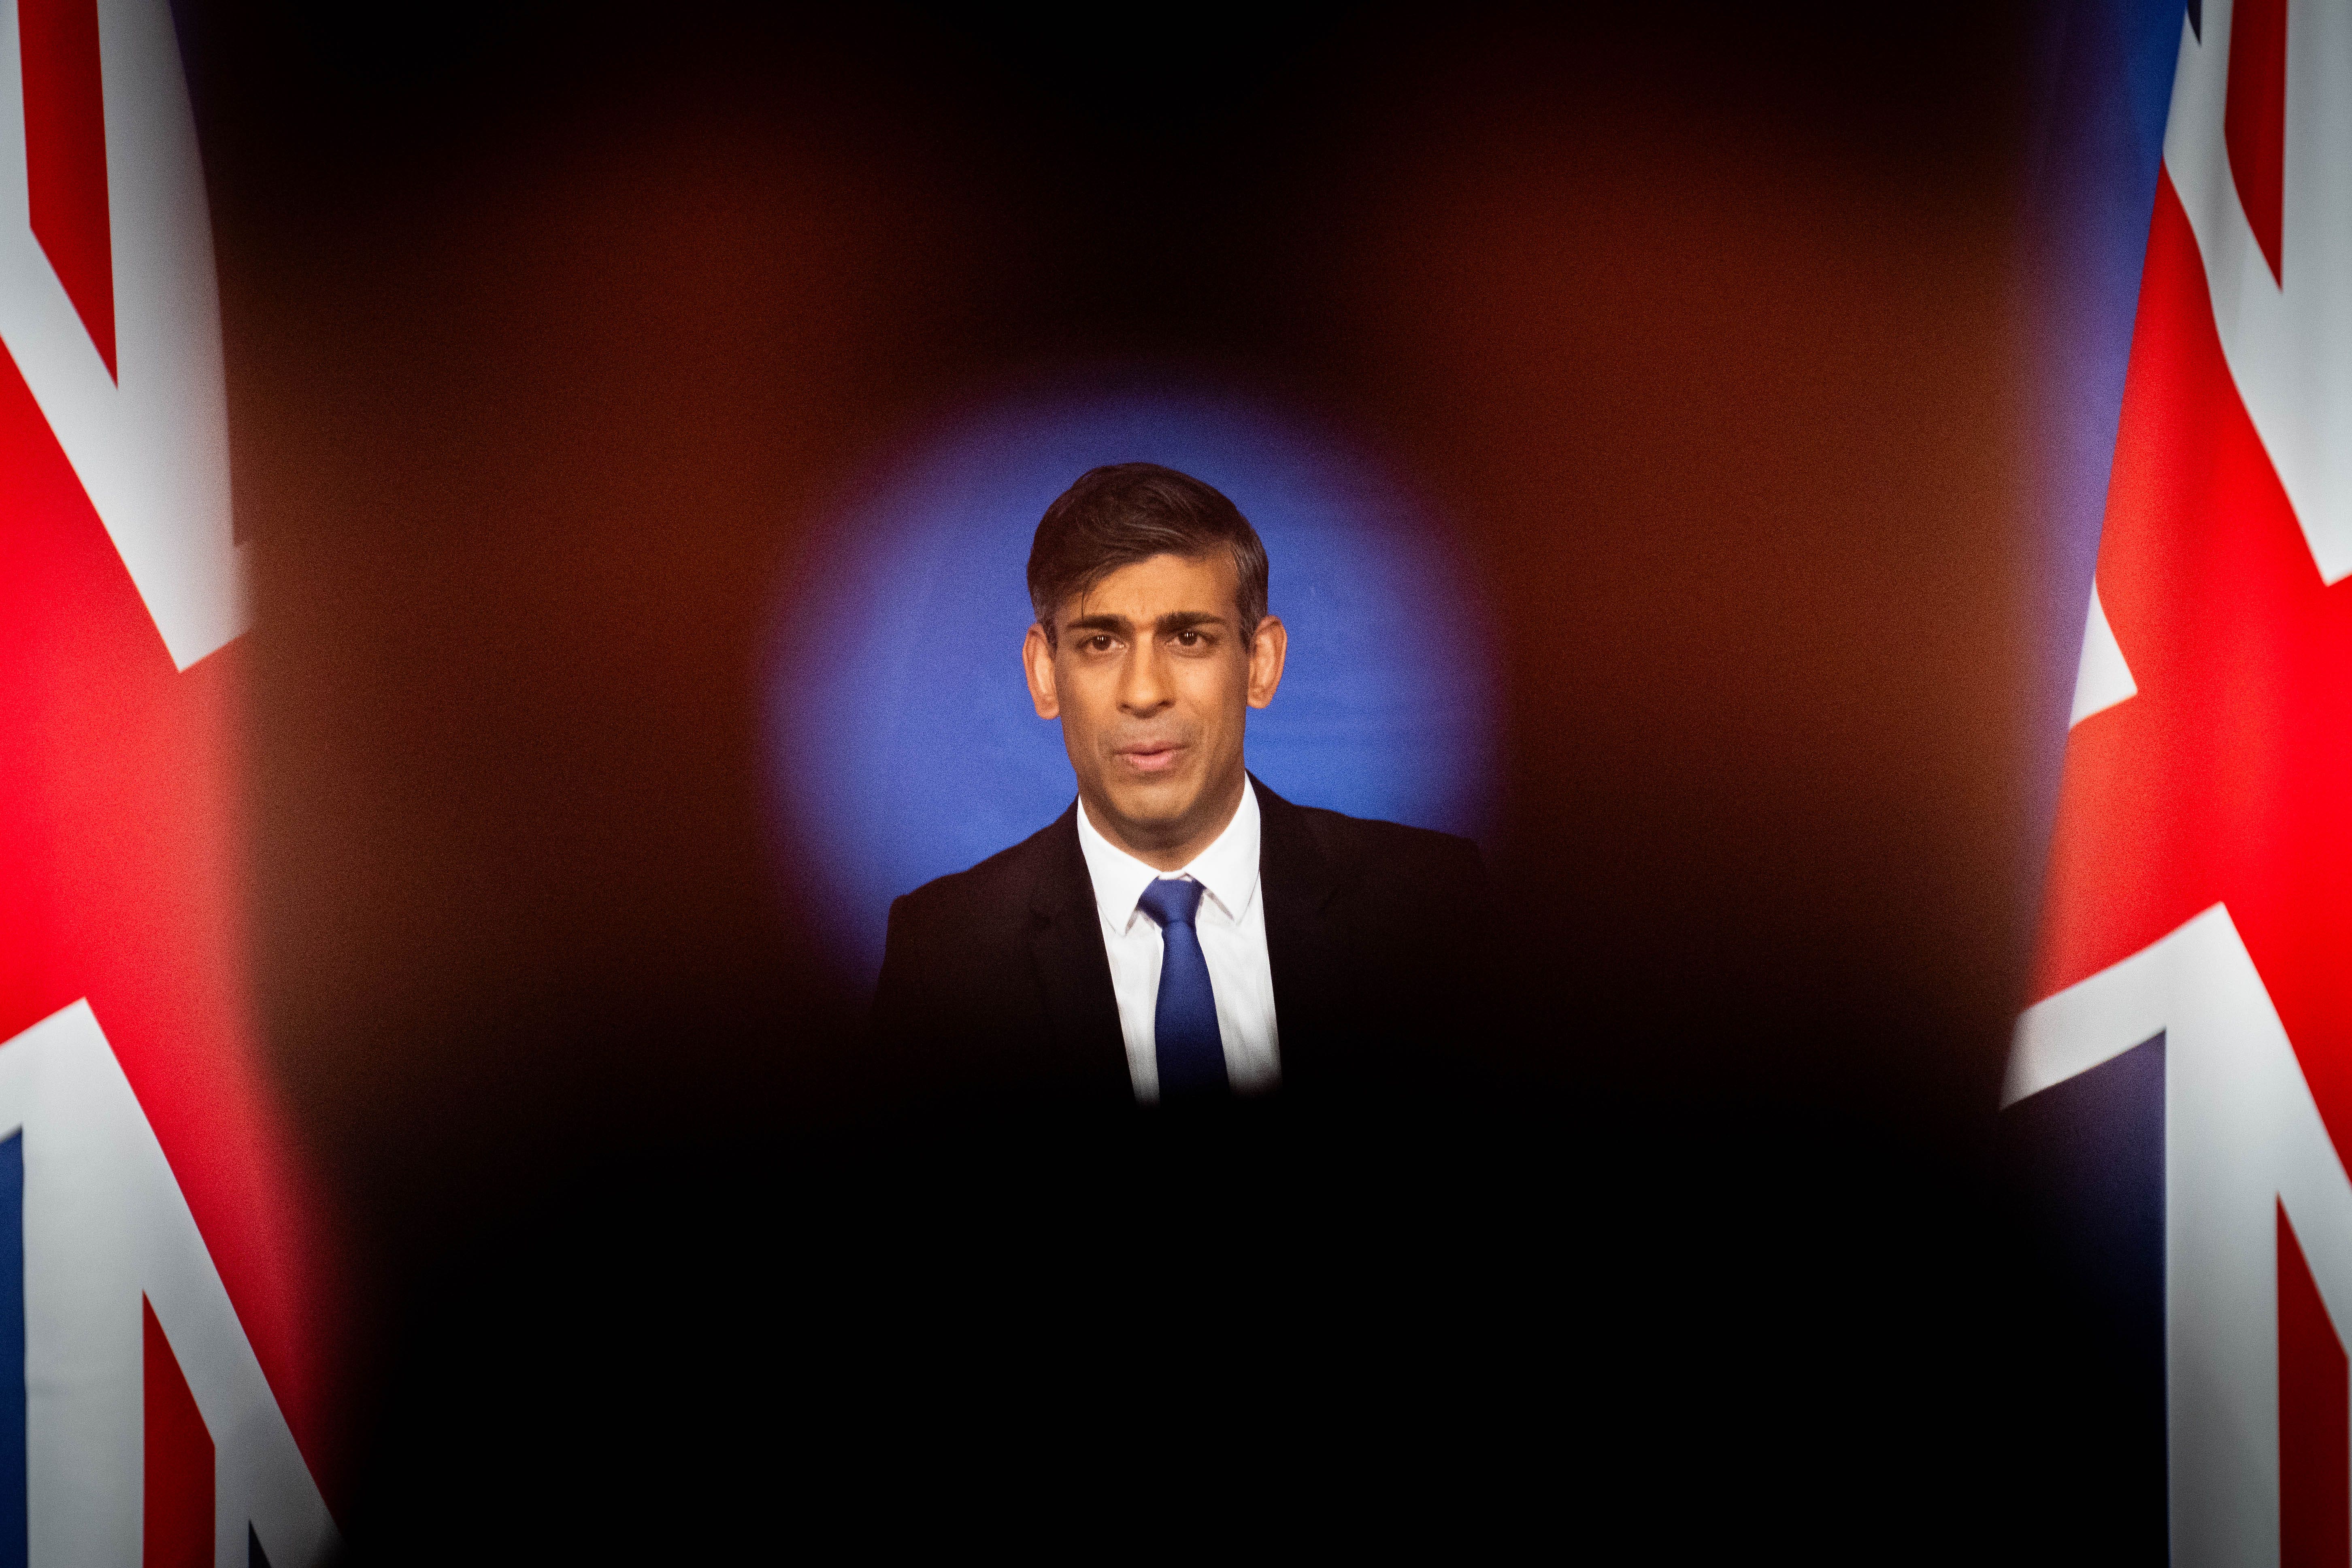 Rishi Sunak has himself to blame for tying his own political fortunes to his impossible pledge on immigration